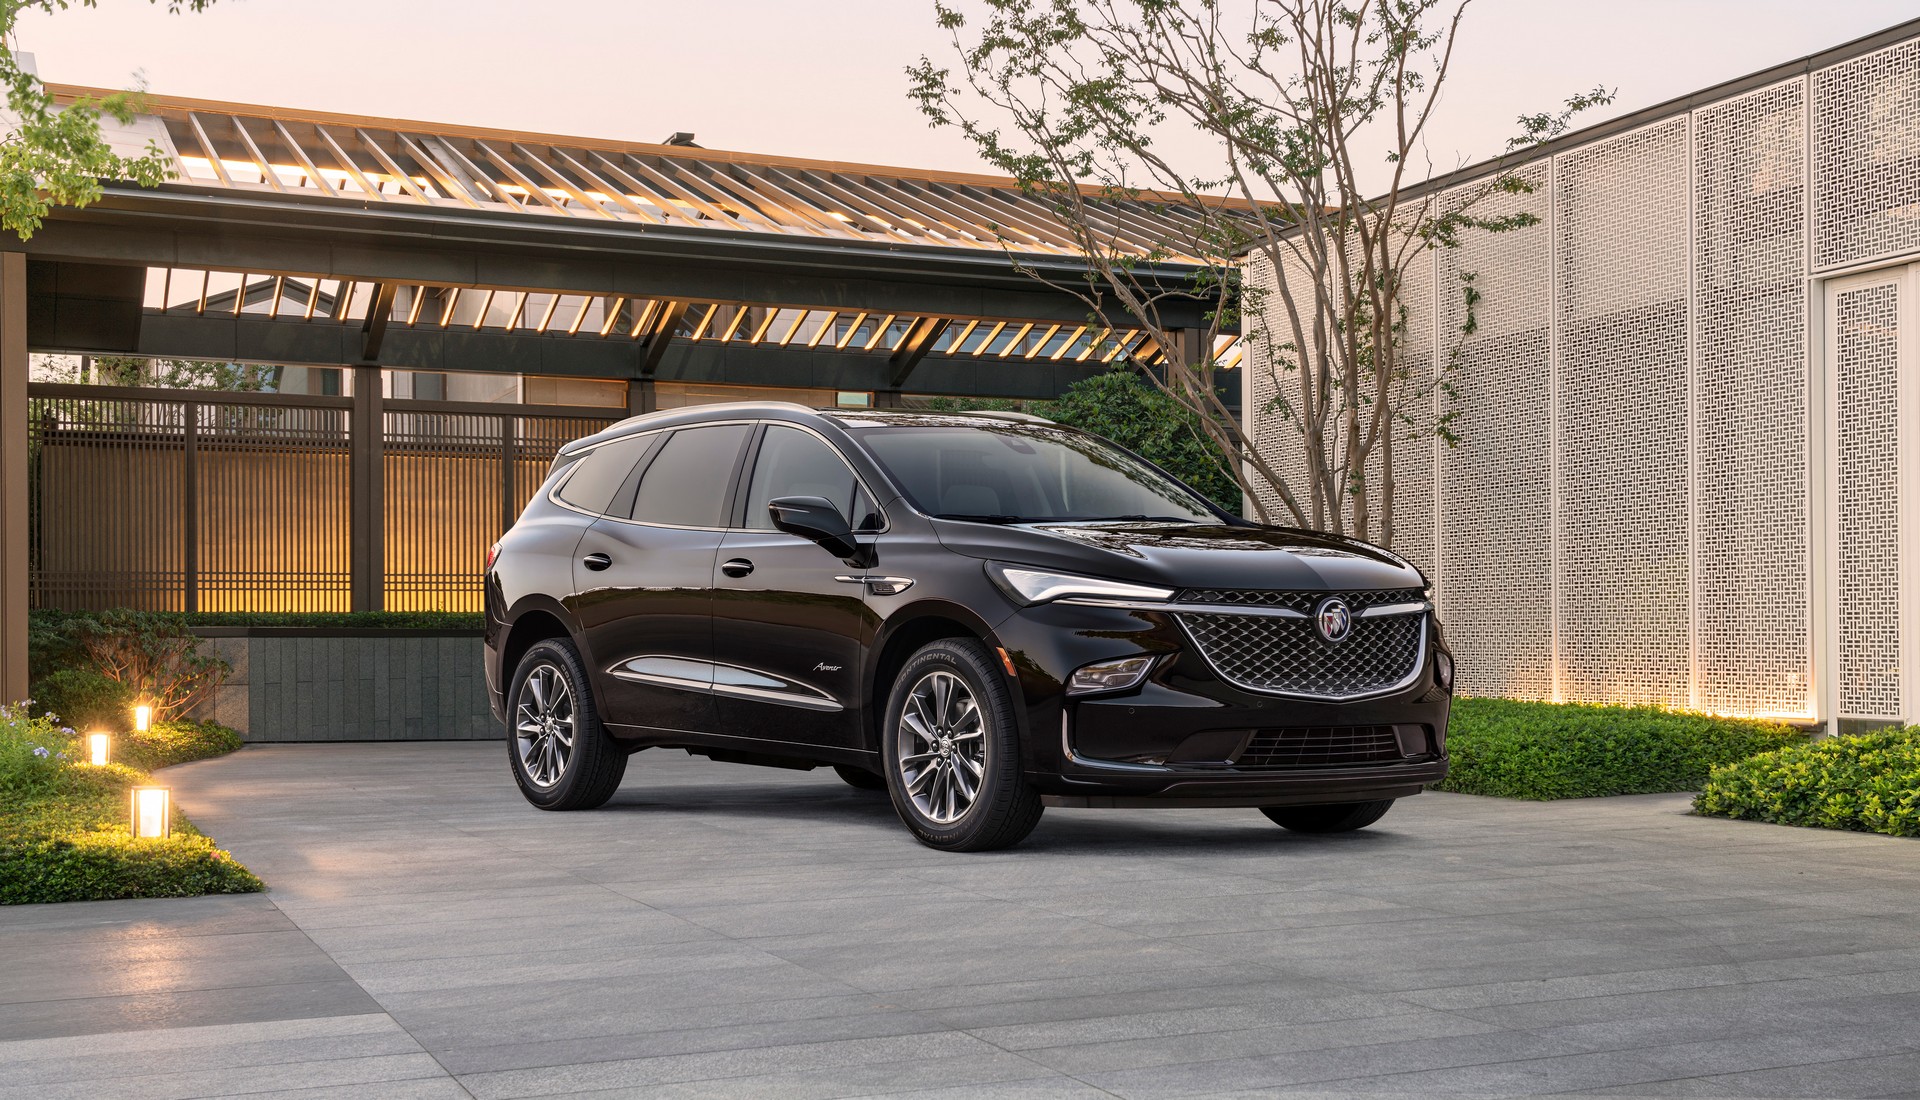 2022 Buick Enclave Facelift Revealed With More Upscale Styling | Carscoops